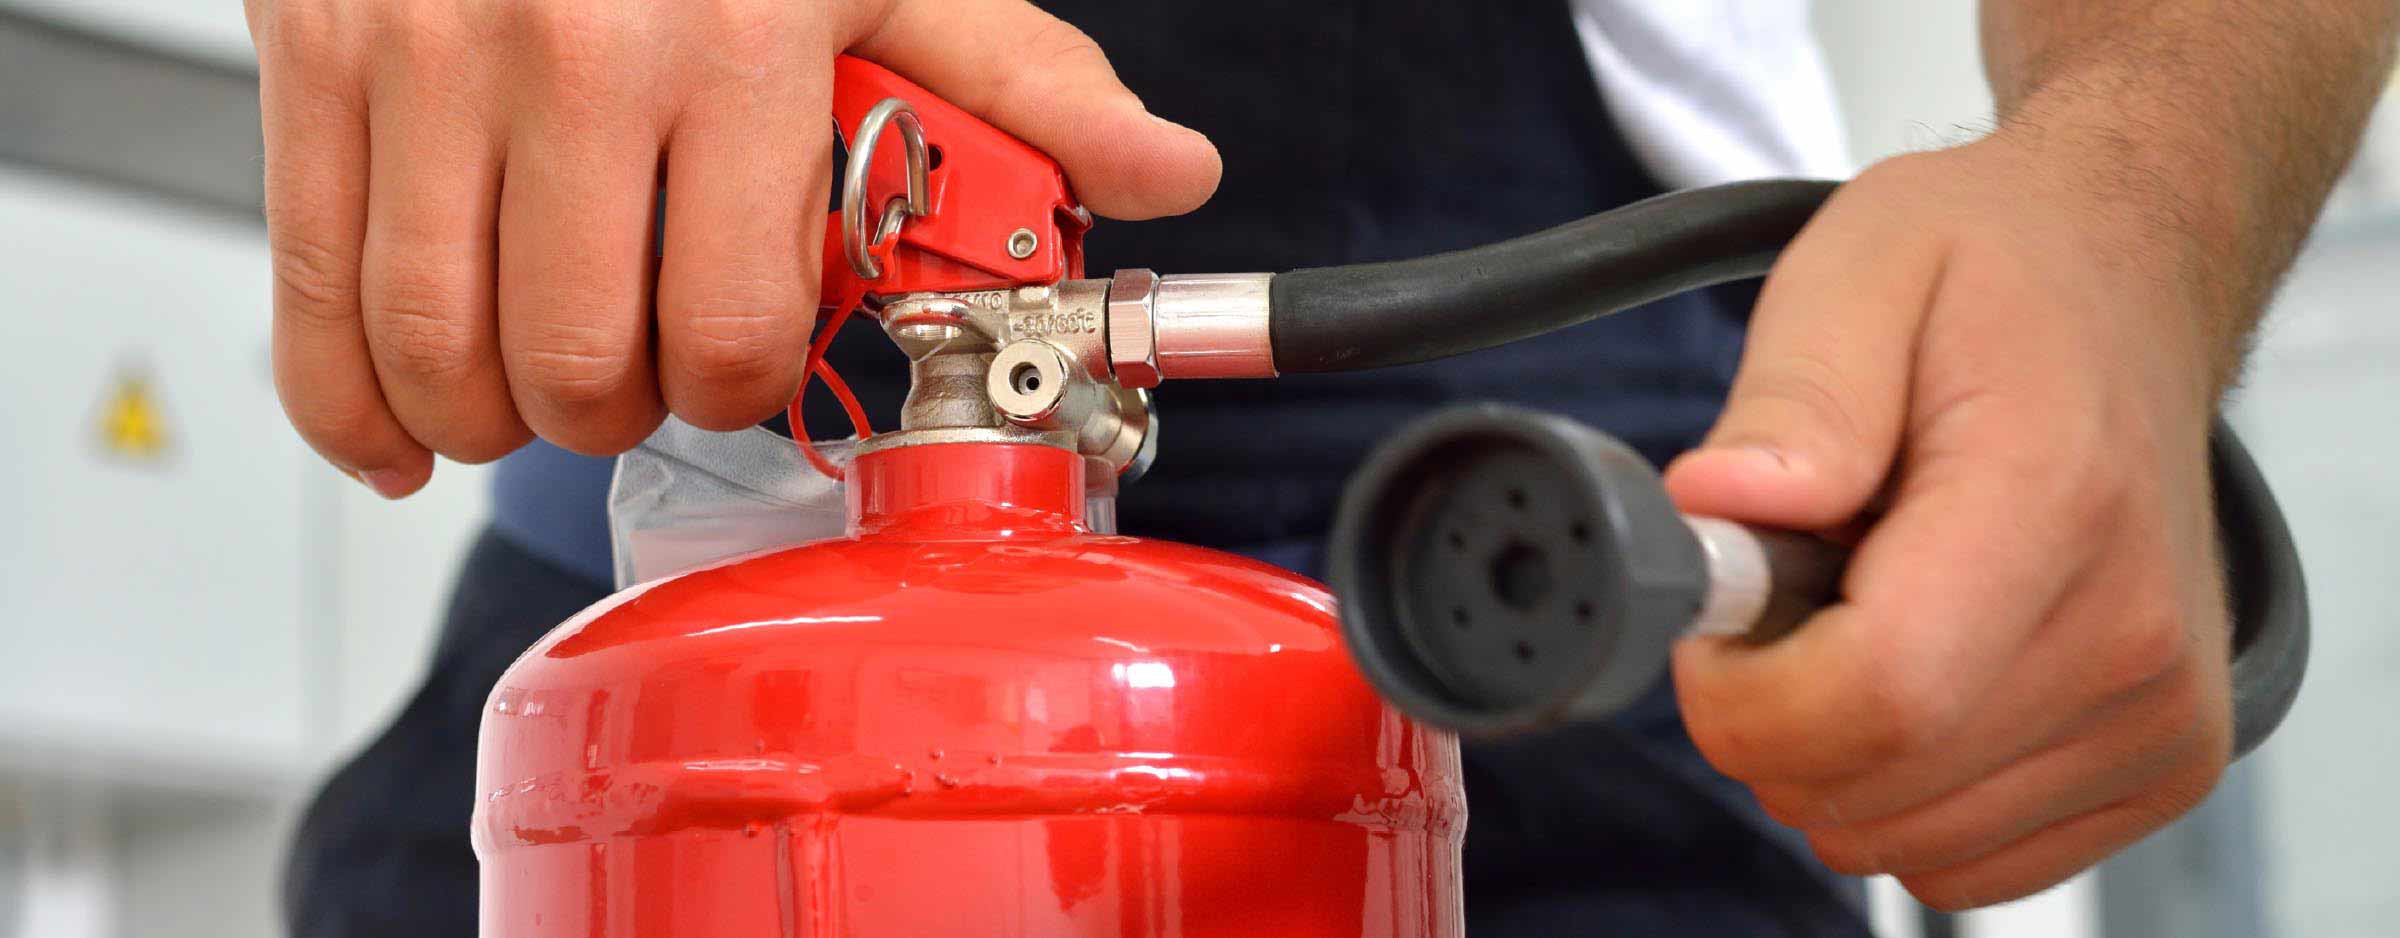 The Basics Of The Fire Safety Course